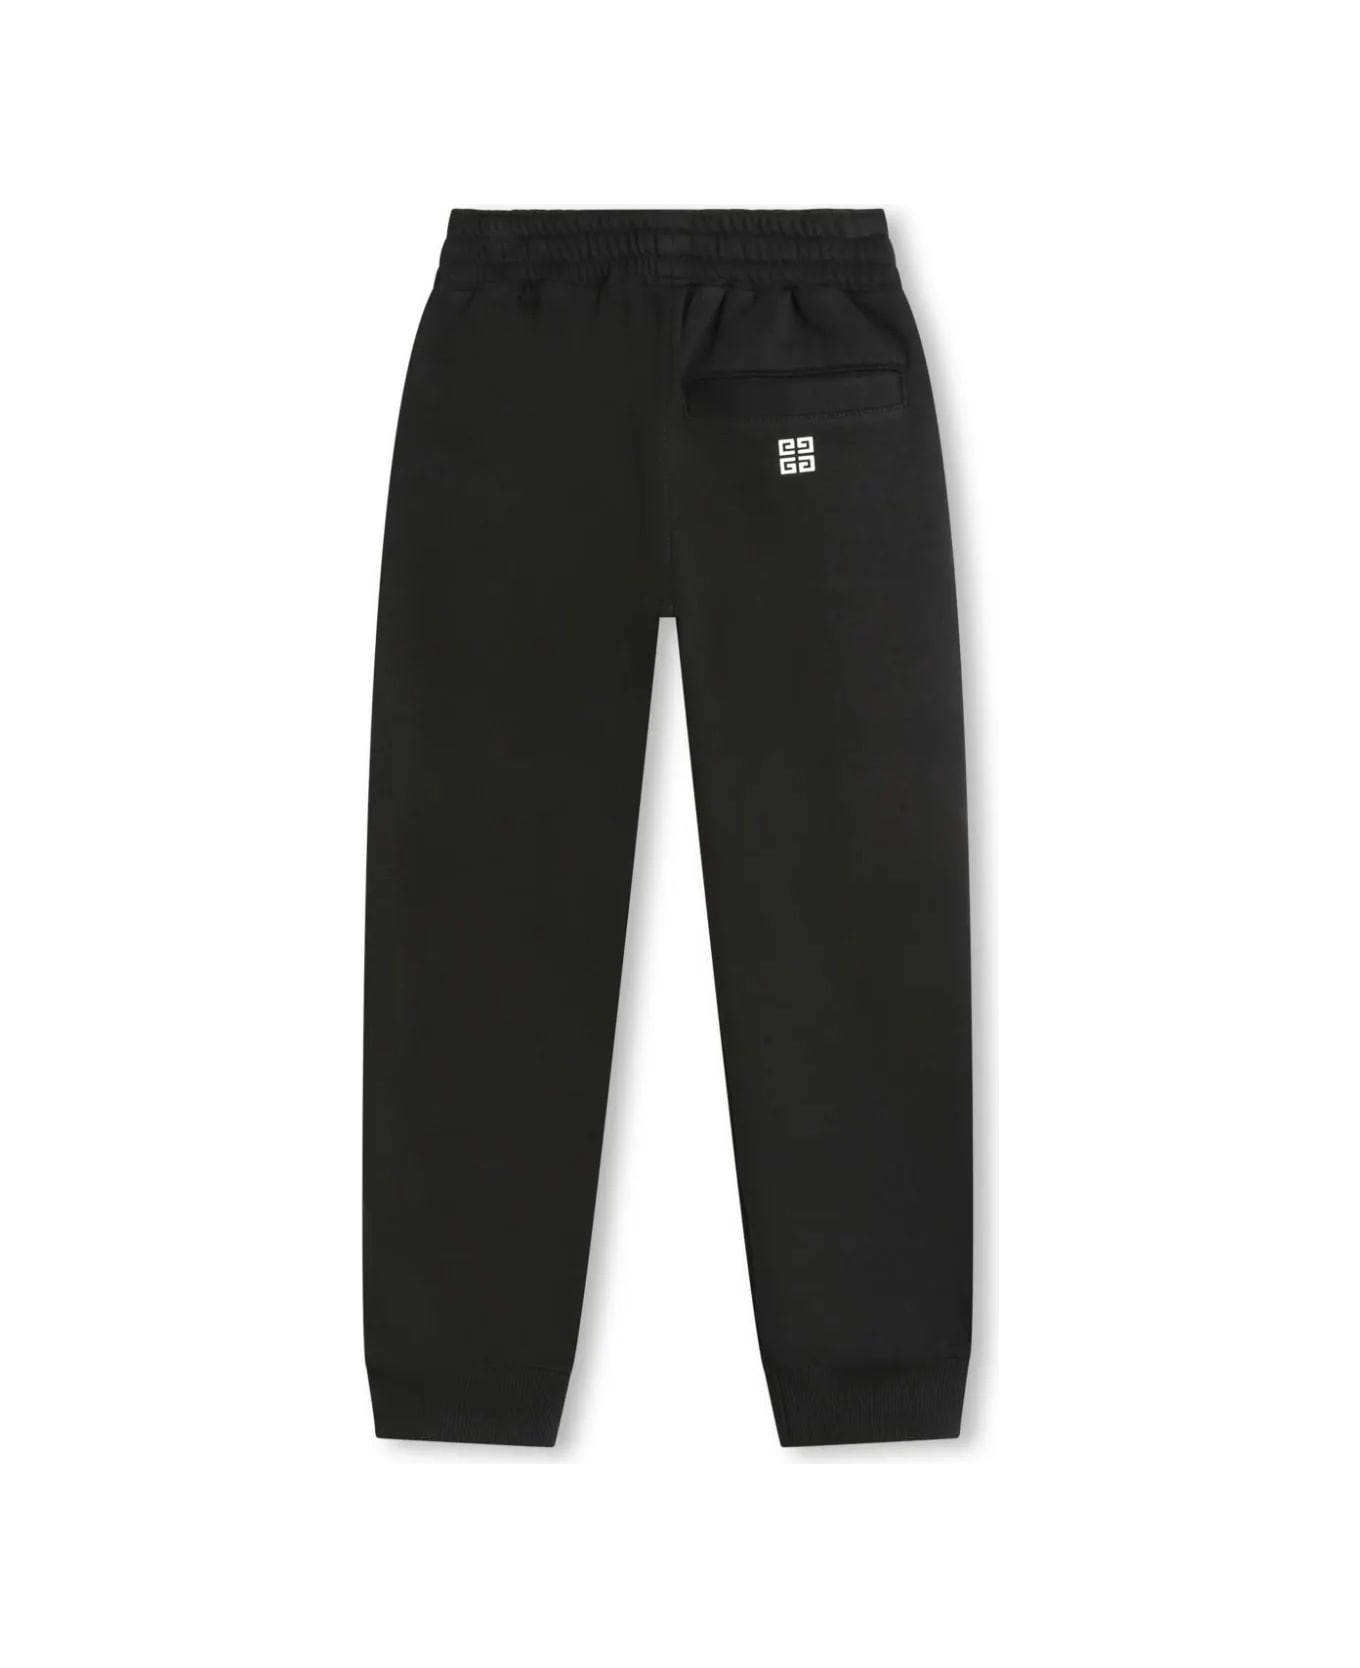 Givenchy Black Joggers With Arched Logo - B Nero ボトムス